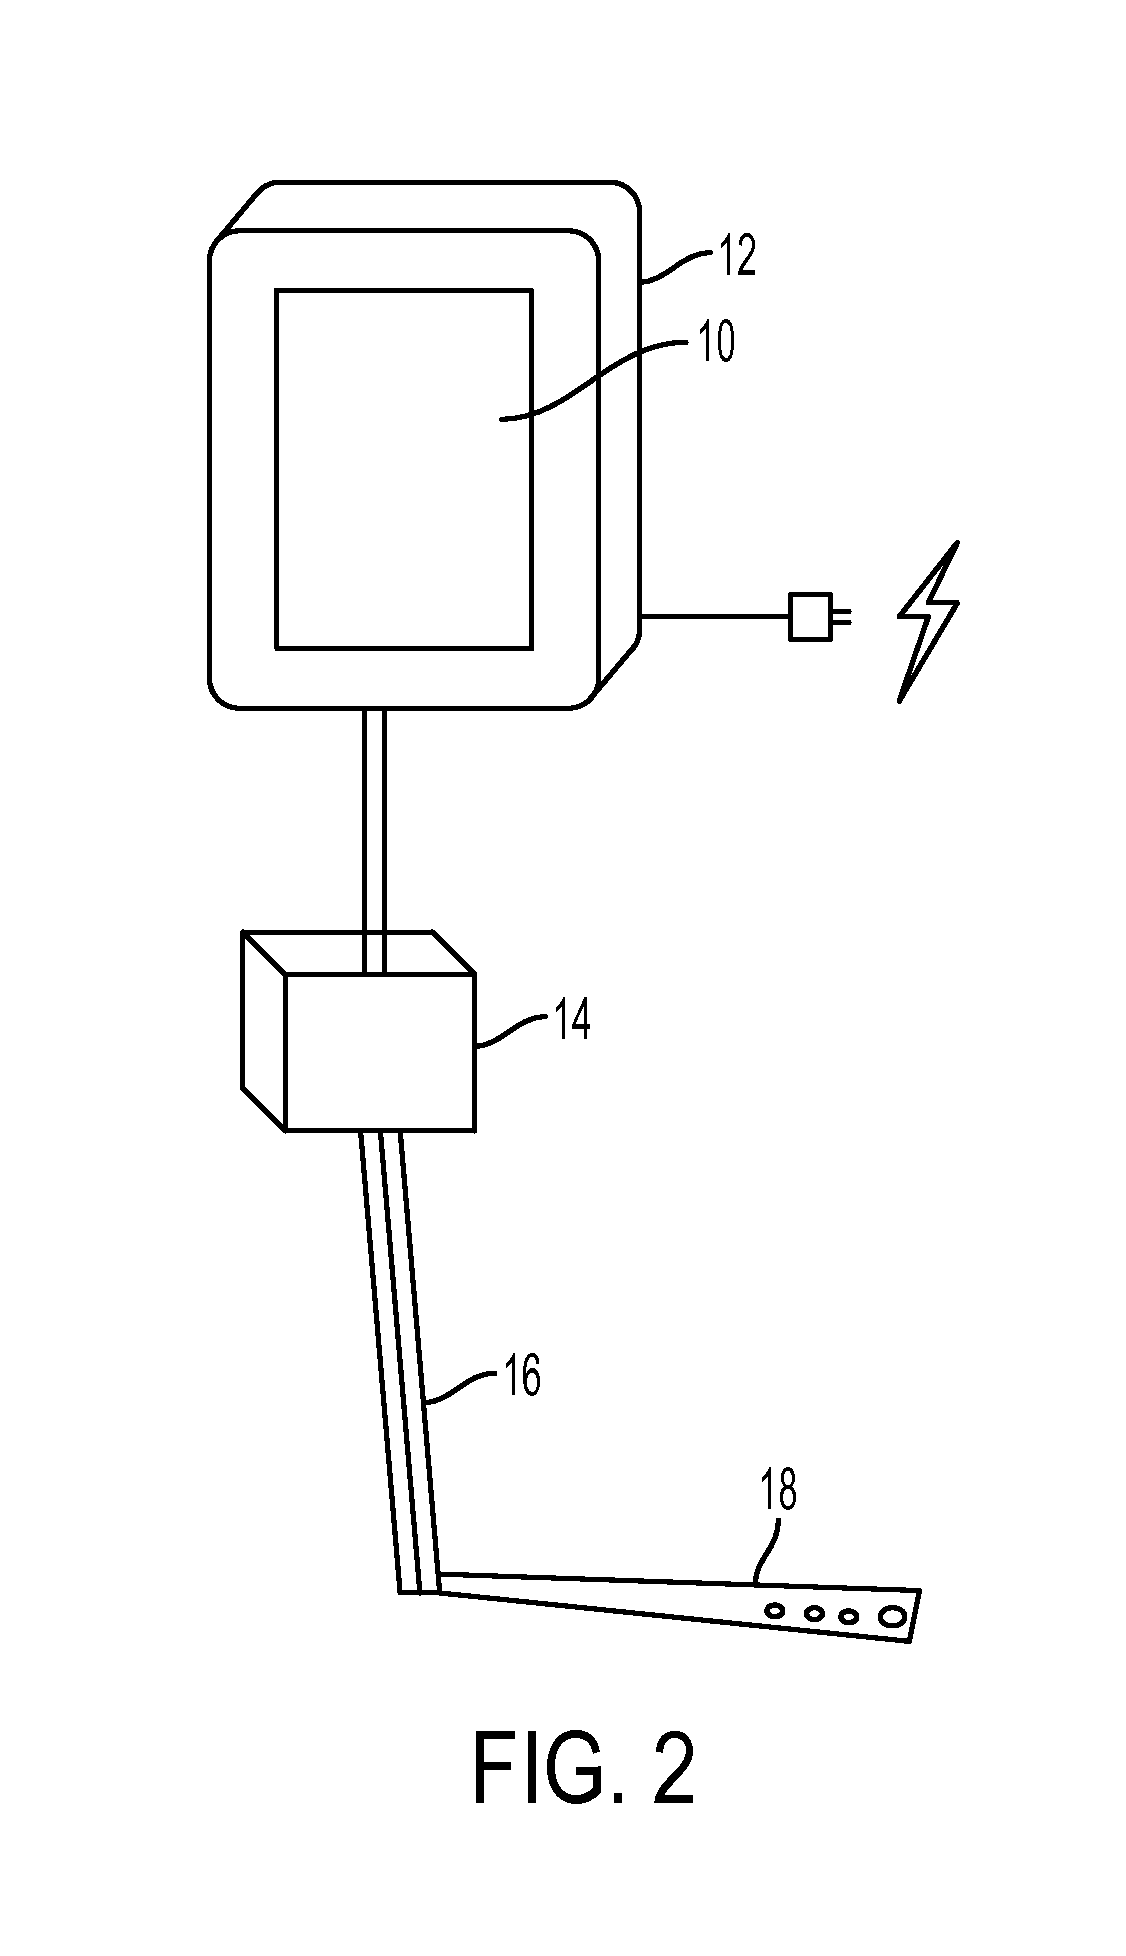 Methods and devices for adjunctive local hypothermia